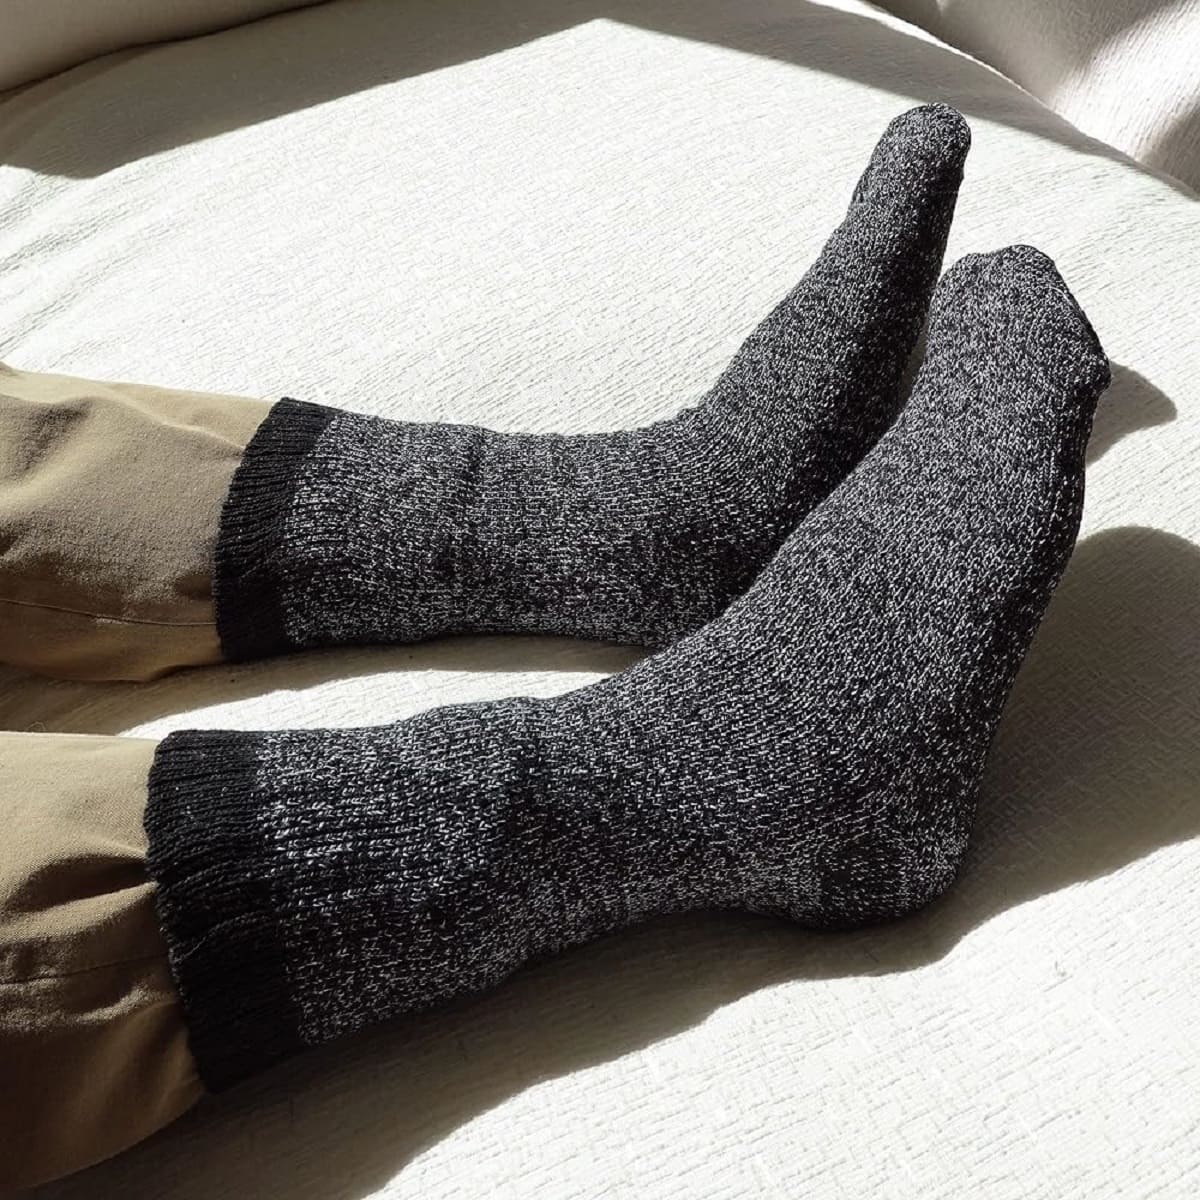 Stay Warm In Extreme Temperatures With Heated Thermal Socks For Men